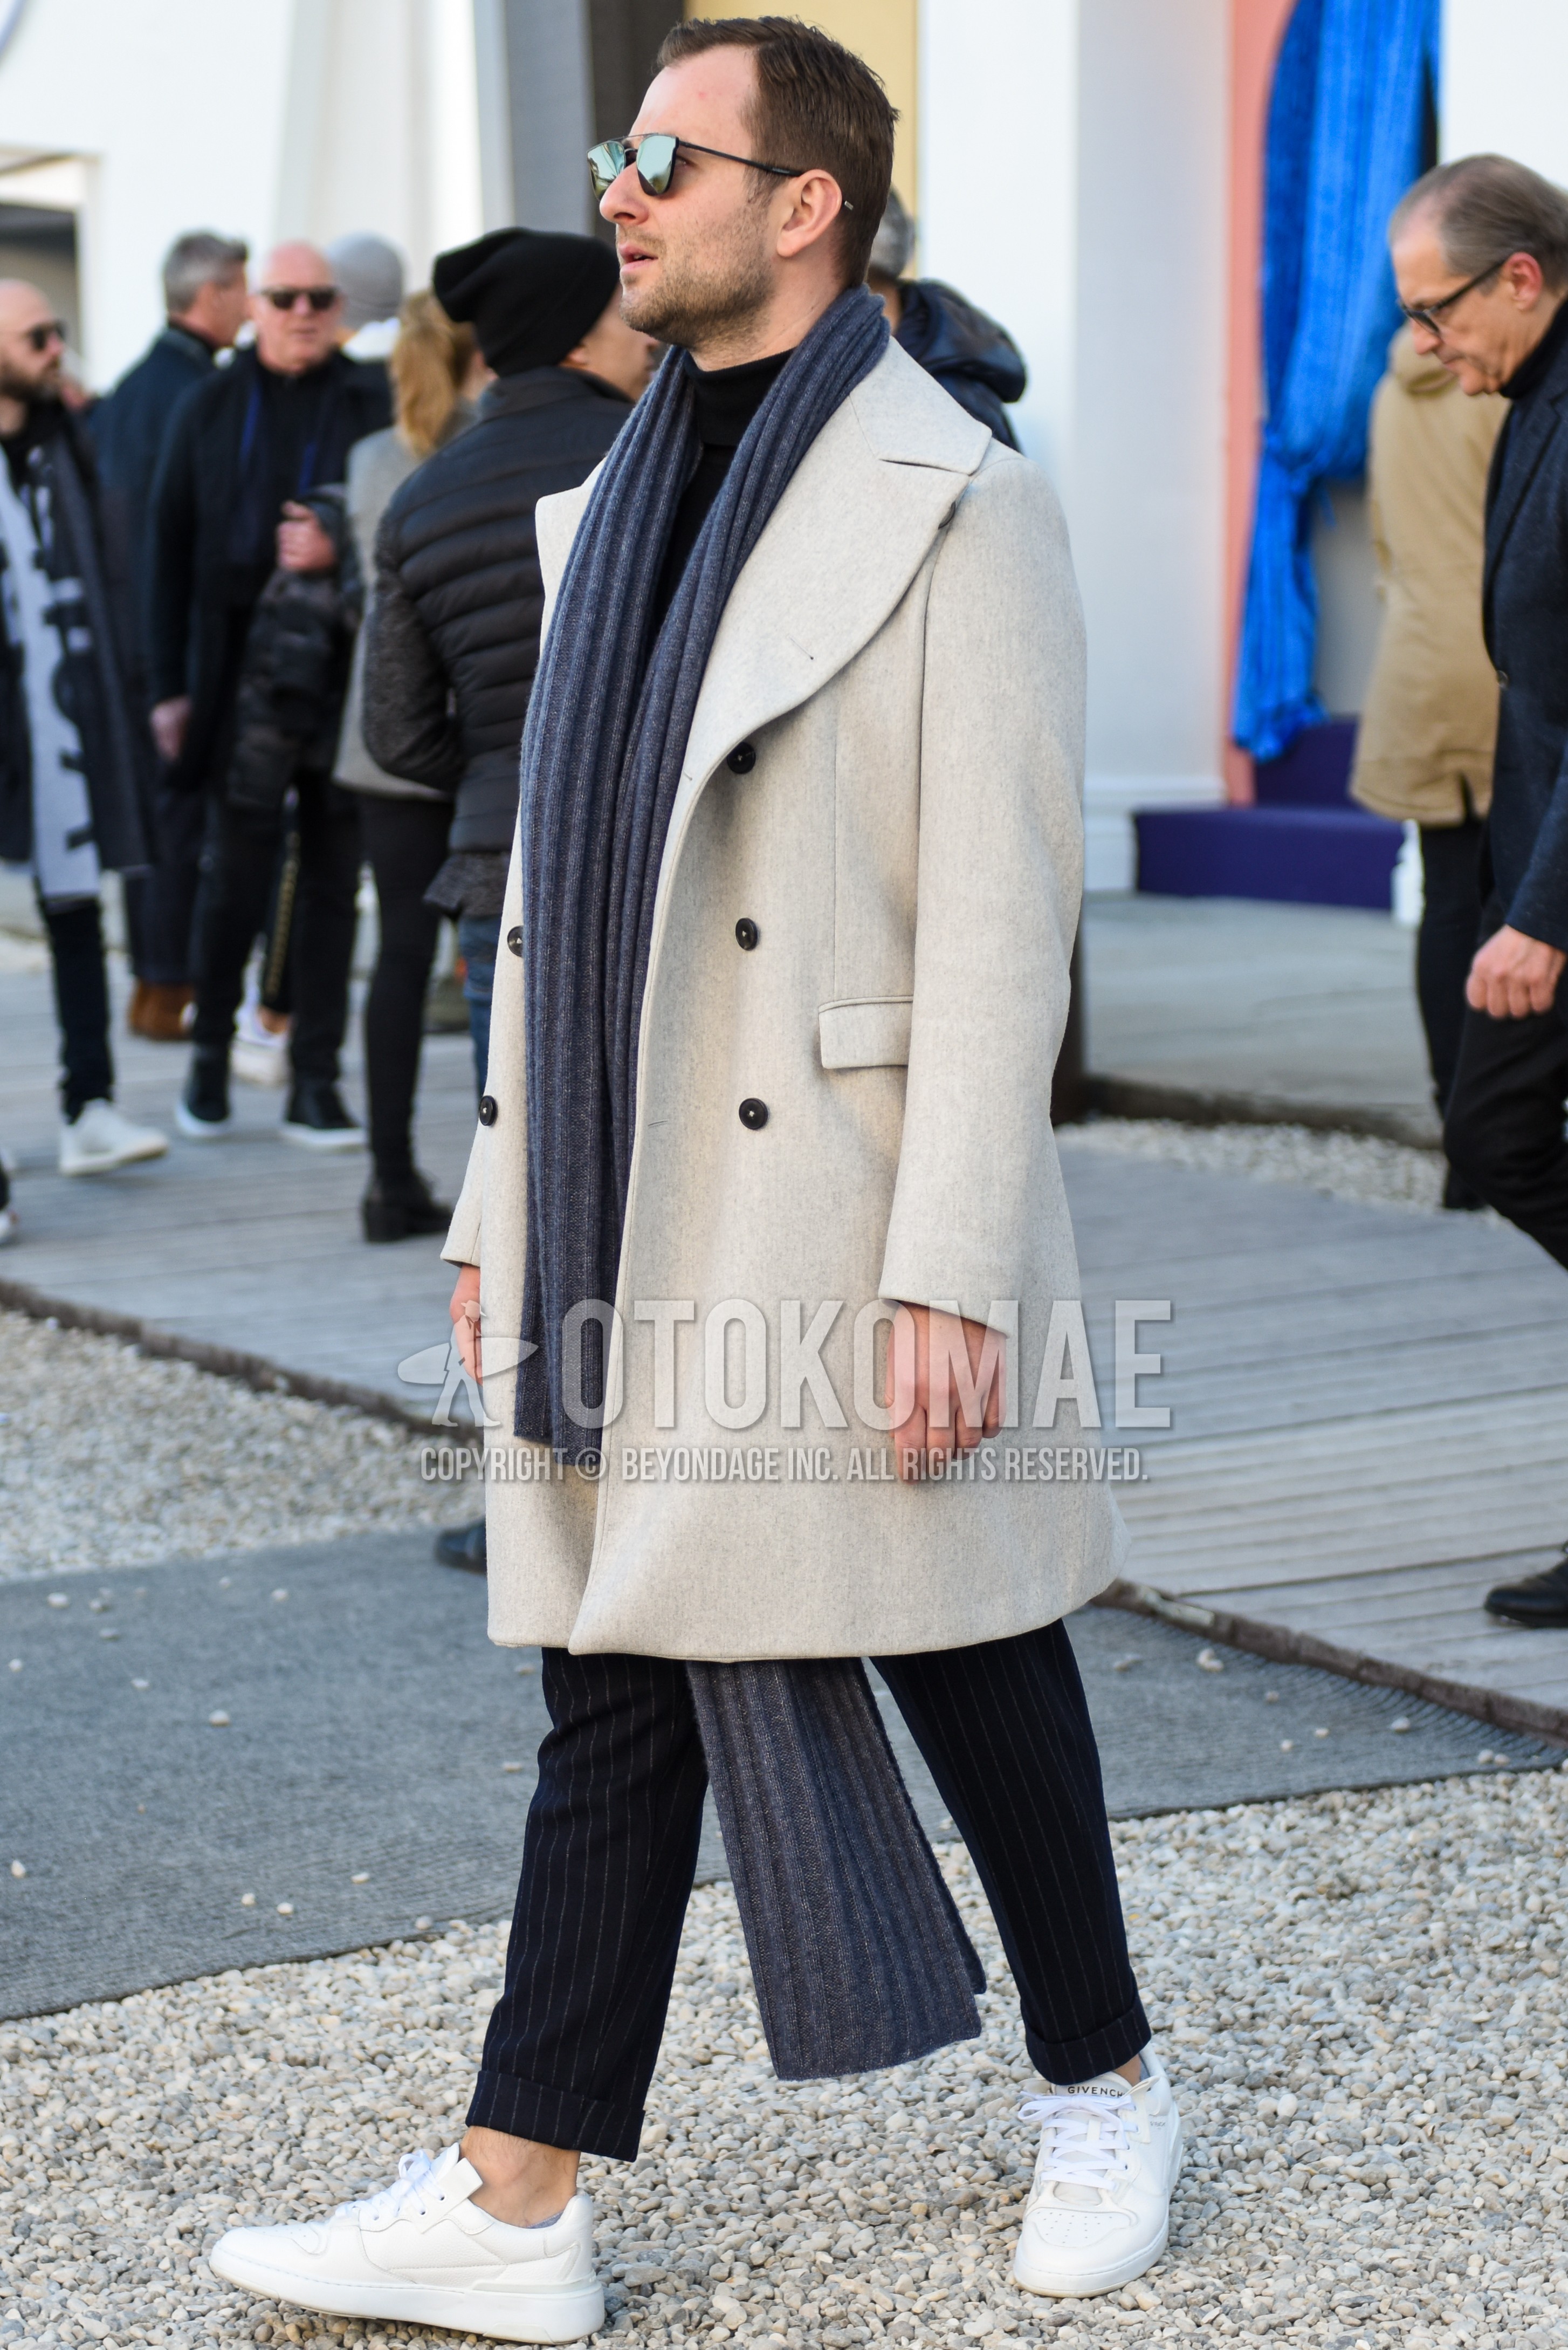 Men's autumn winter outfit with silver plain sunglasses, white plain ulster coat, dark gray stripes slacks, dark gray stripes ankle pants, white low-cut sneakers.